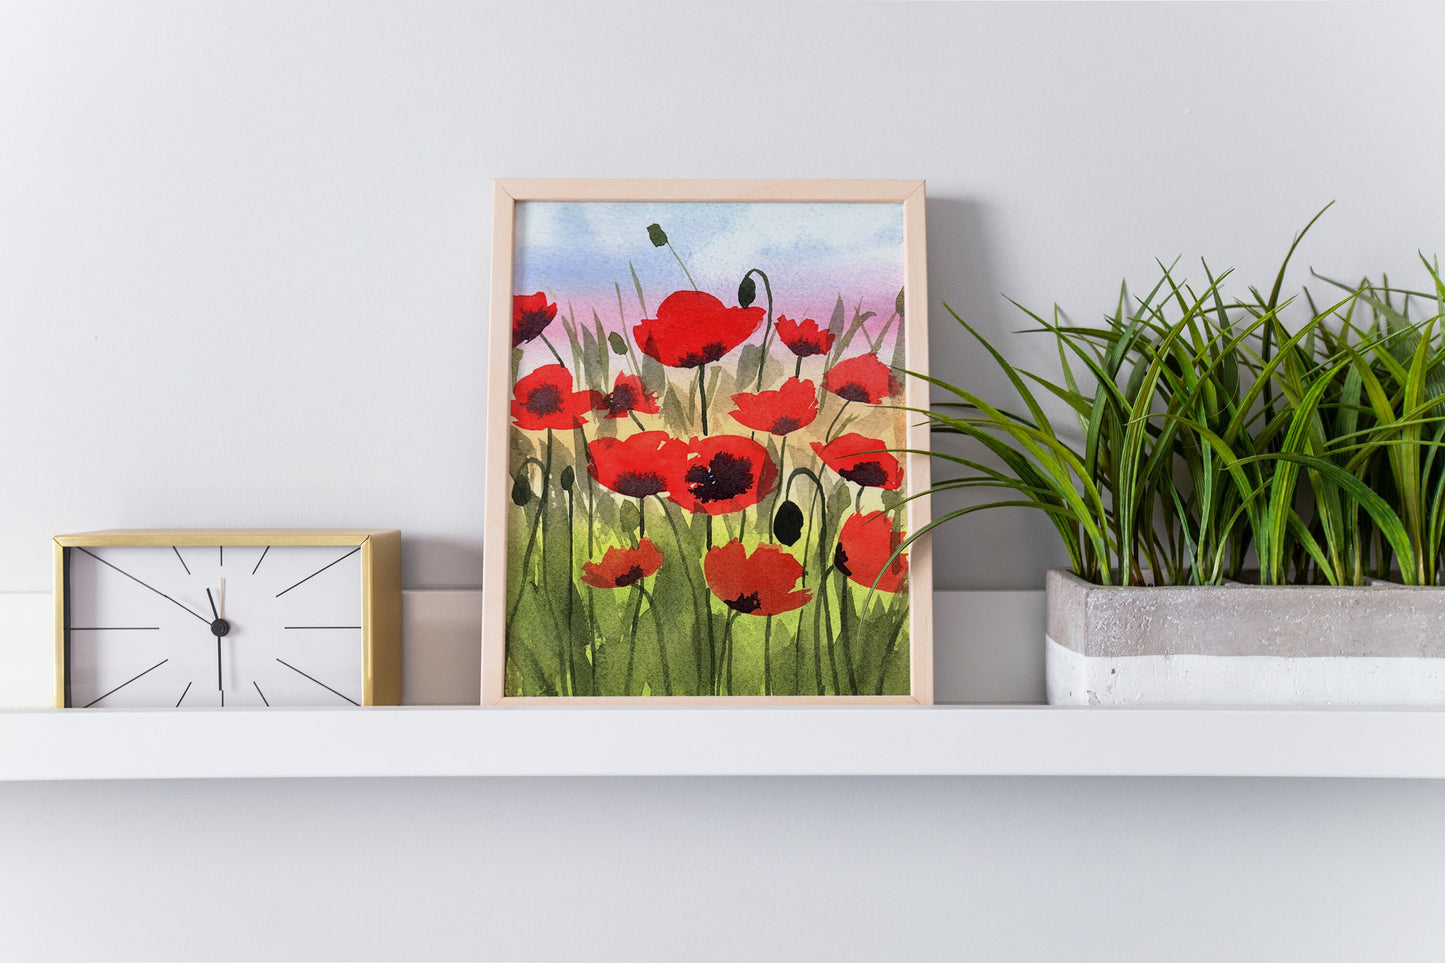 Poppies at Sunset - Reproduction, Fine Art Print, Giclee Print